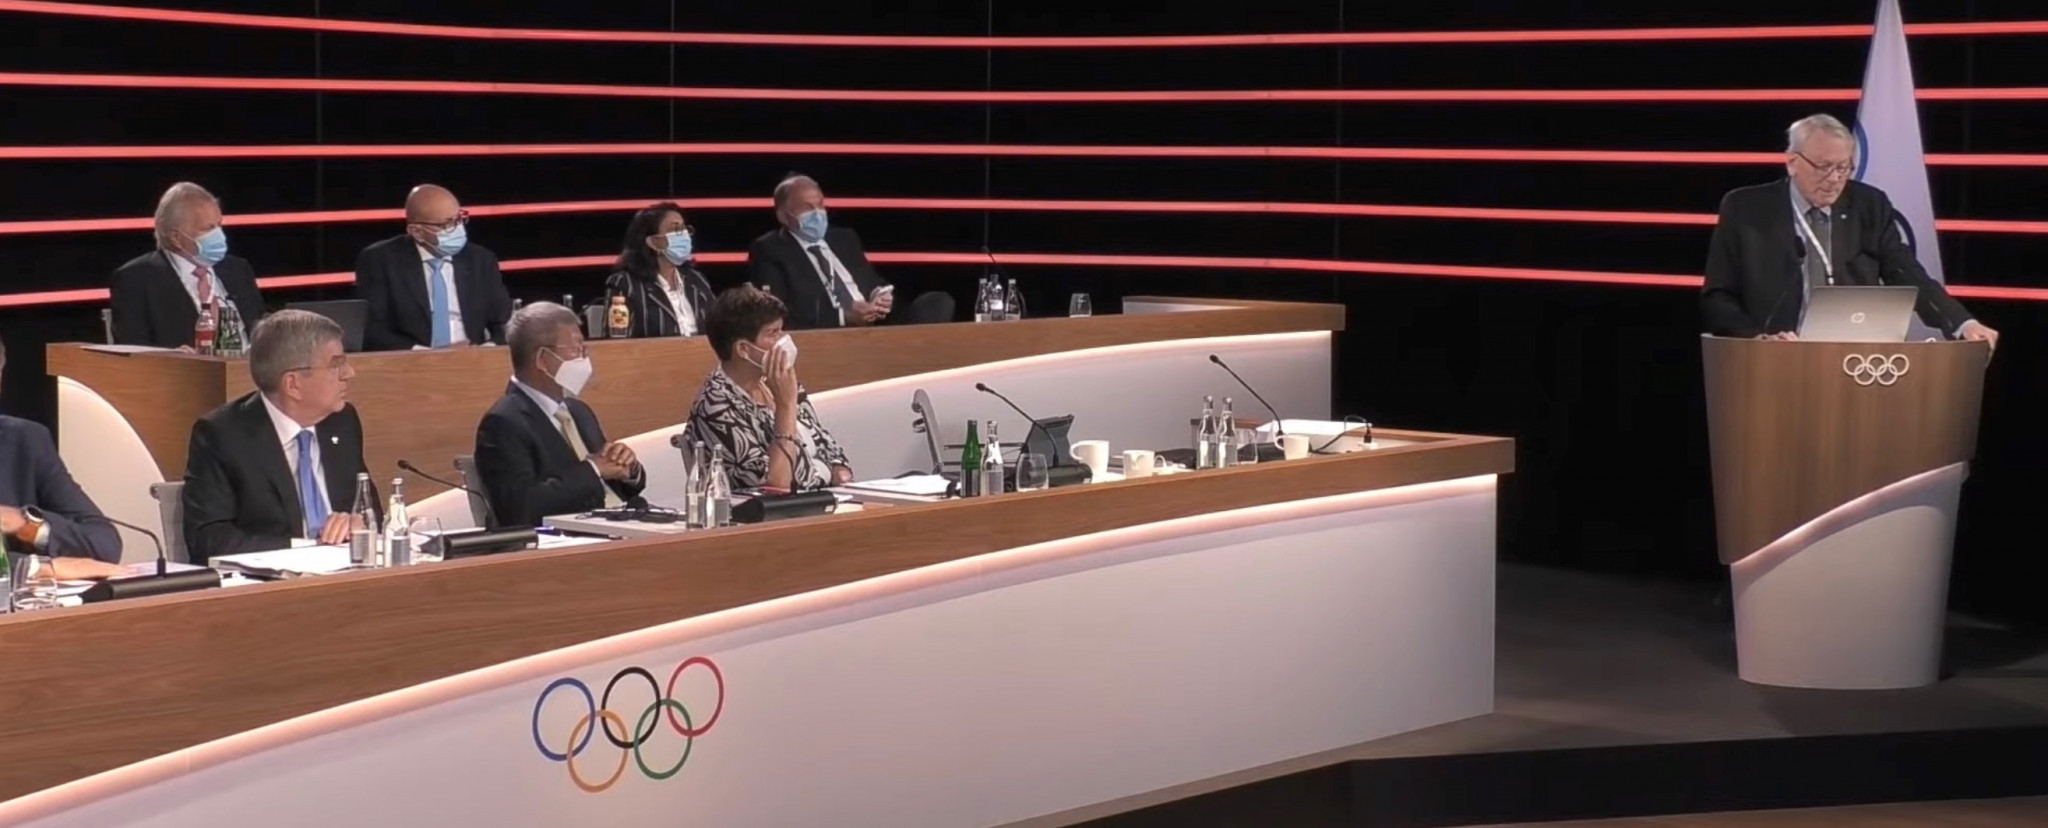 insidethegames is reporting LIVE from the 139th IOC Session in Lausanne